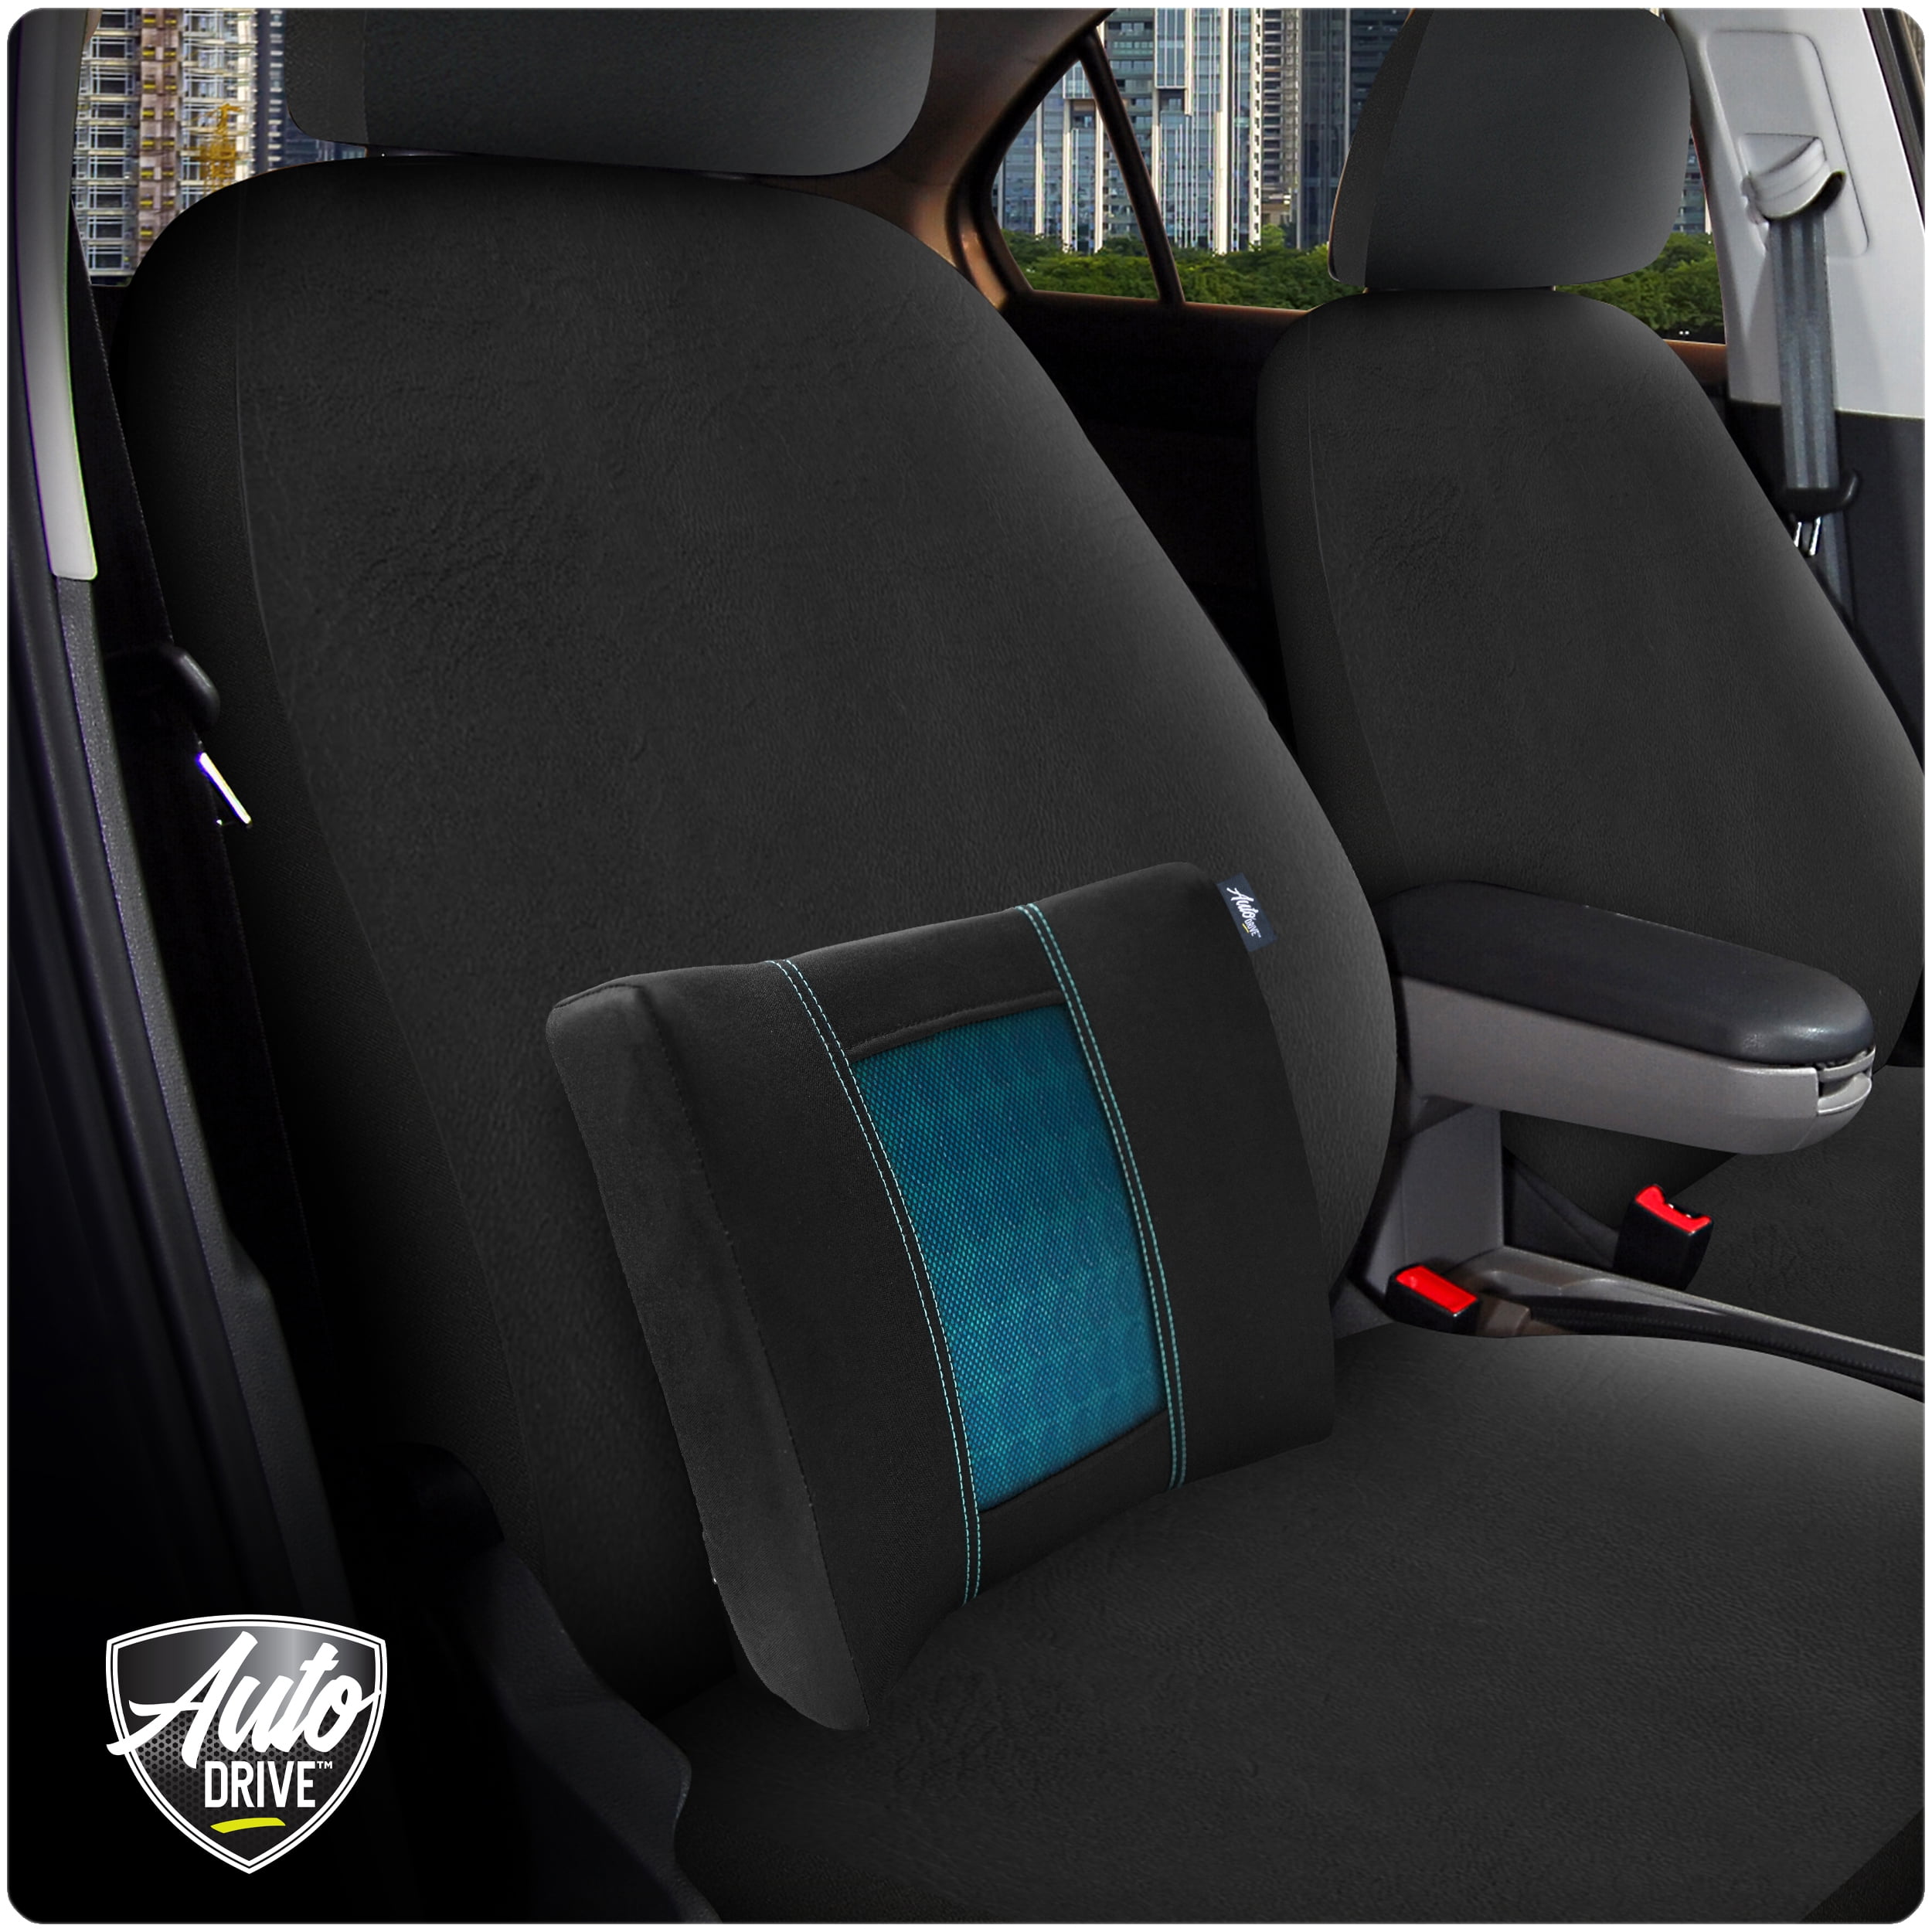 GELRIDE Gel Enhanced Car Seat Cushion for Comfortable Drive - For Lower Back  Pain Back / Lumbar Support - Buy GELRIDE Gel Enhanced Car Seat Cushion for  Comfortable Drive - For Lower